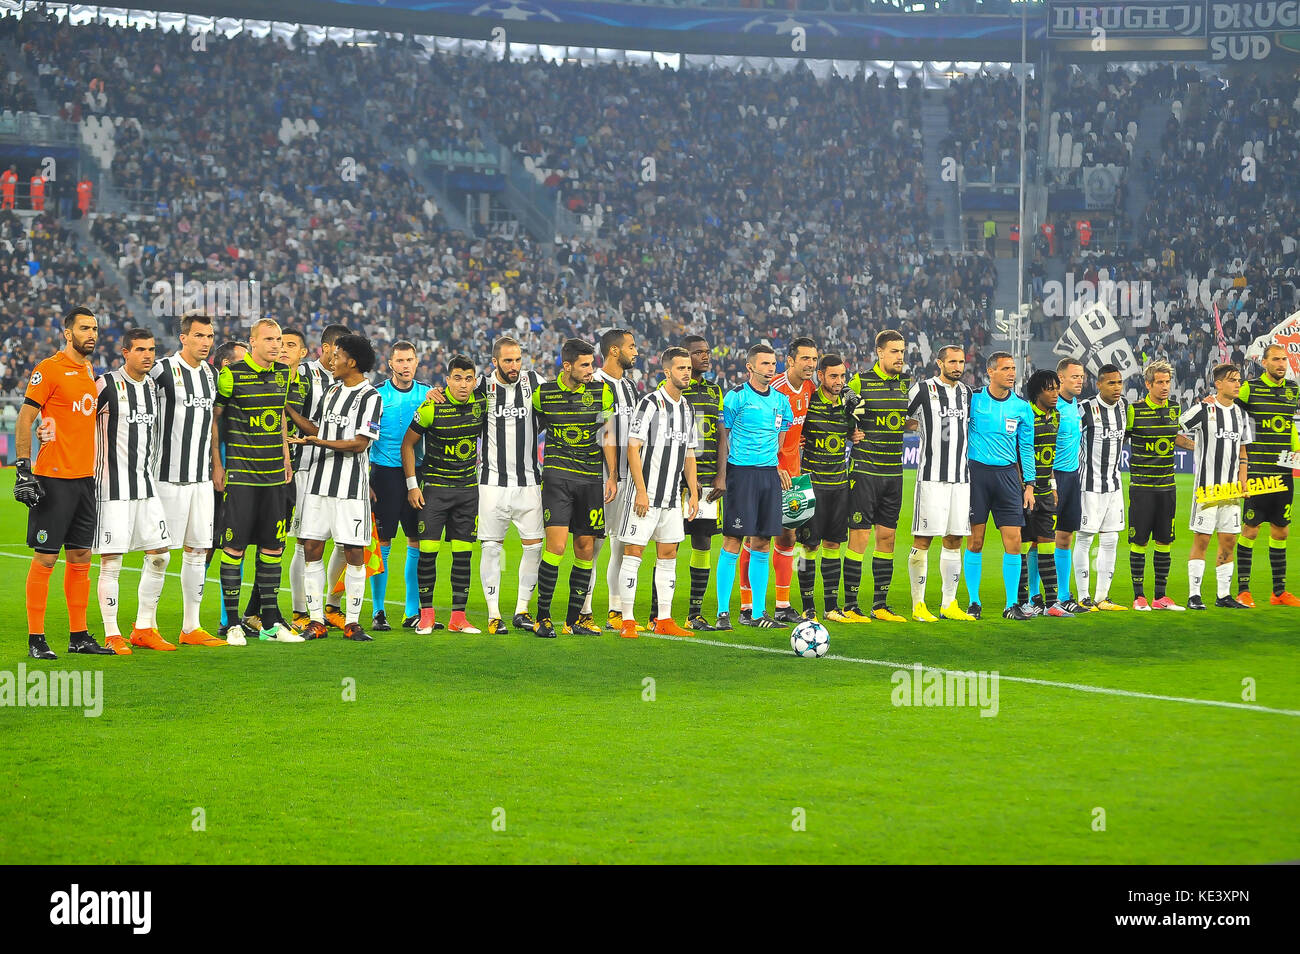 Turin, Italy. 18th Oct, 2017. All Team during the UEFA Champions League football match between Juventus FC and Sporting Lisbona at Allianz Stadium on 18 October, 2017 in Turin, Italy. Credit: FABIO PETROSINO/Alamy Live News Stock Photo